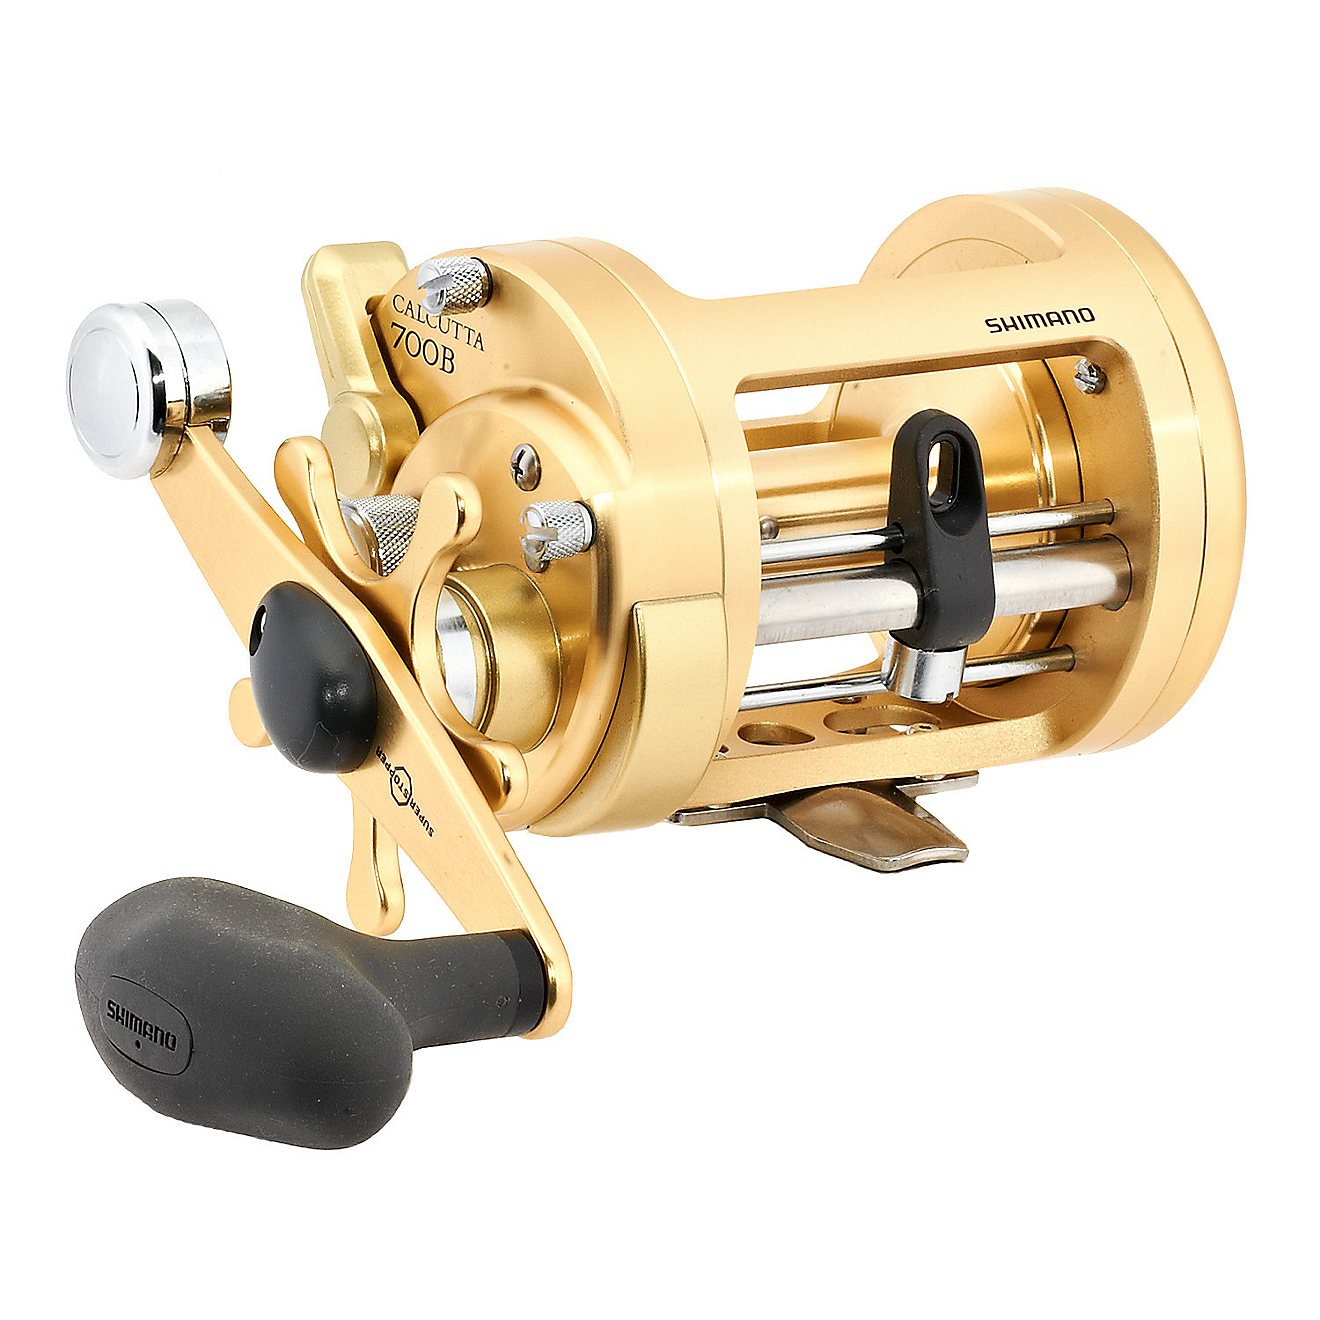 Shimano Calcutta 700-B Round Baitcast Reel Right-handed                                                                          - view number 1